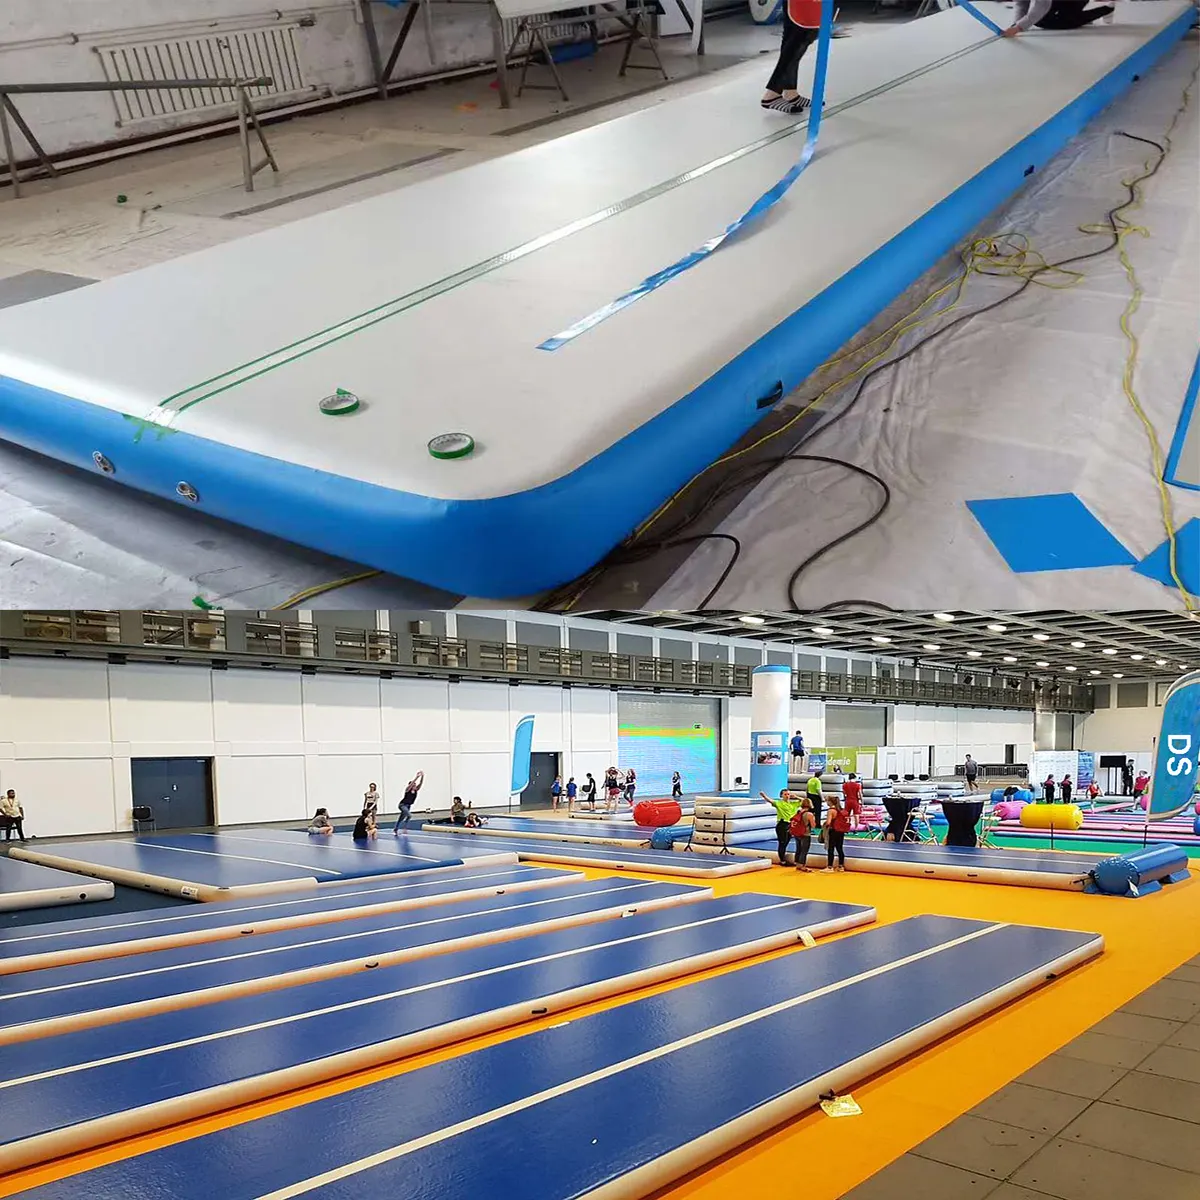 New 4m/5m/6m/8m/10m/12m/15minflatable air track gymnastics inflatable tumble airtrack air tumbling floor mat